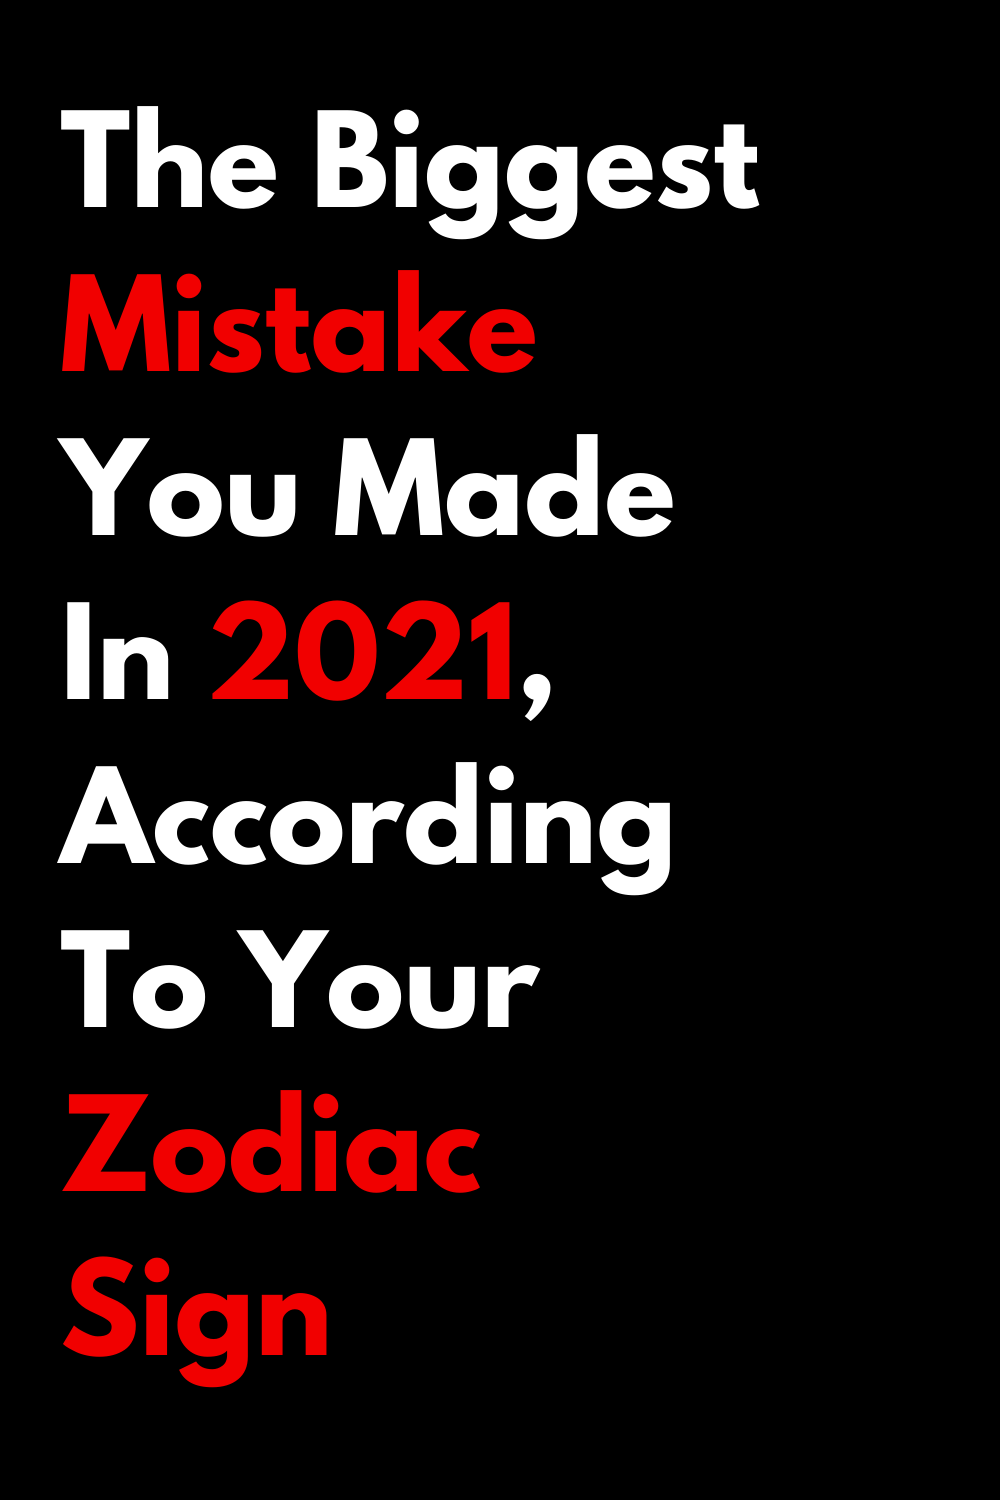 The Biggest Mistake You Made In 2021, According To Your Zodiac Sign